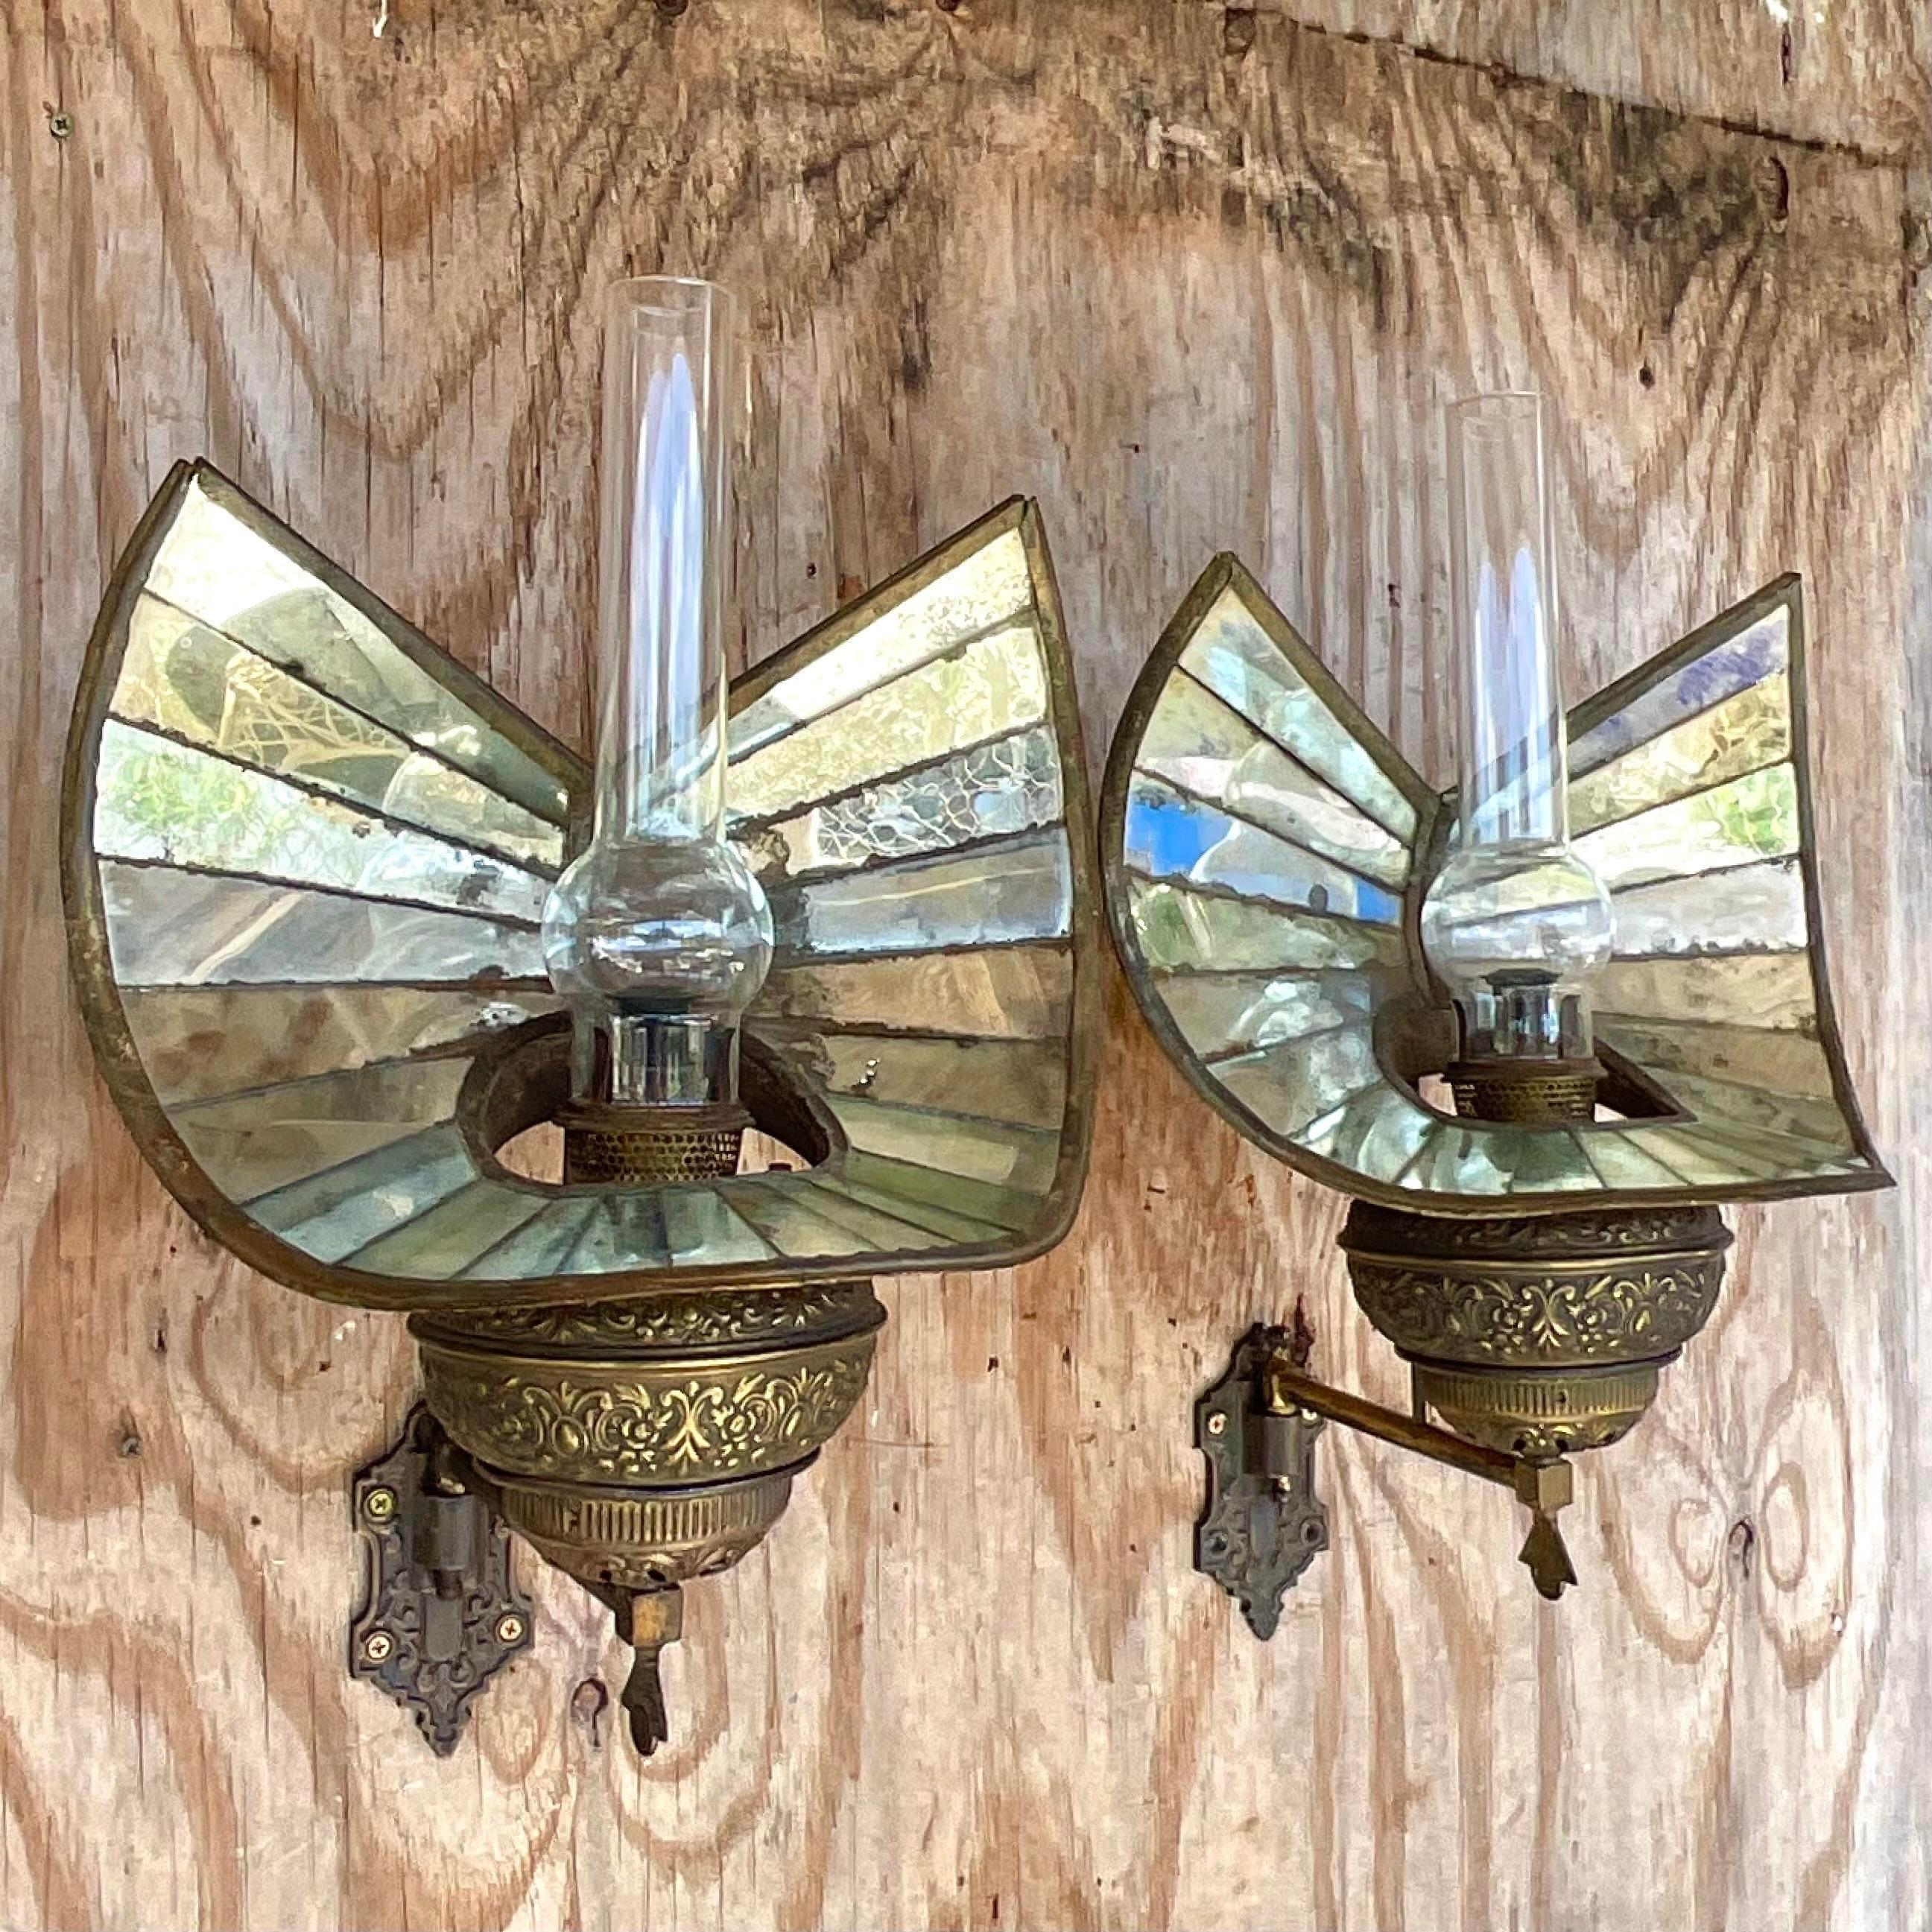 An exceptional pair of vintage Boho gas wall lanterns. Made by the iconic Wheeler Reflector Co. and tagged on the back. Gorgeous stacked mirror screen with glass chimneys and brass body. Acquired from a Palm Beach estate. 